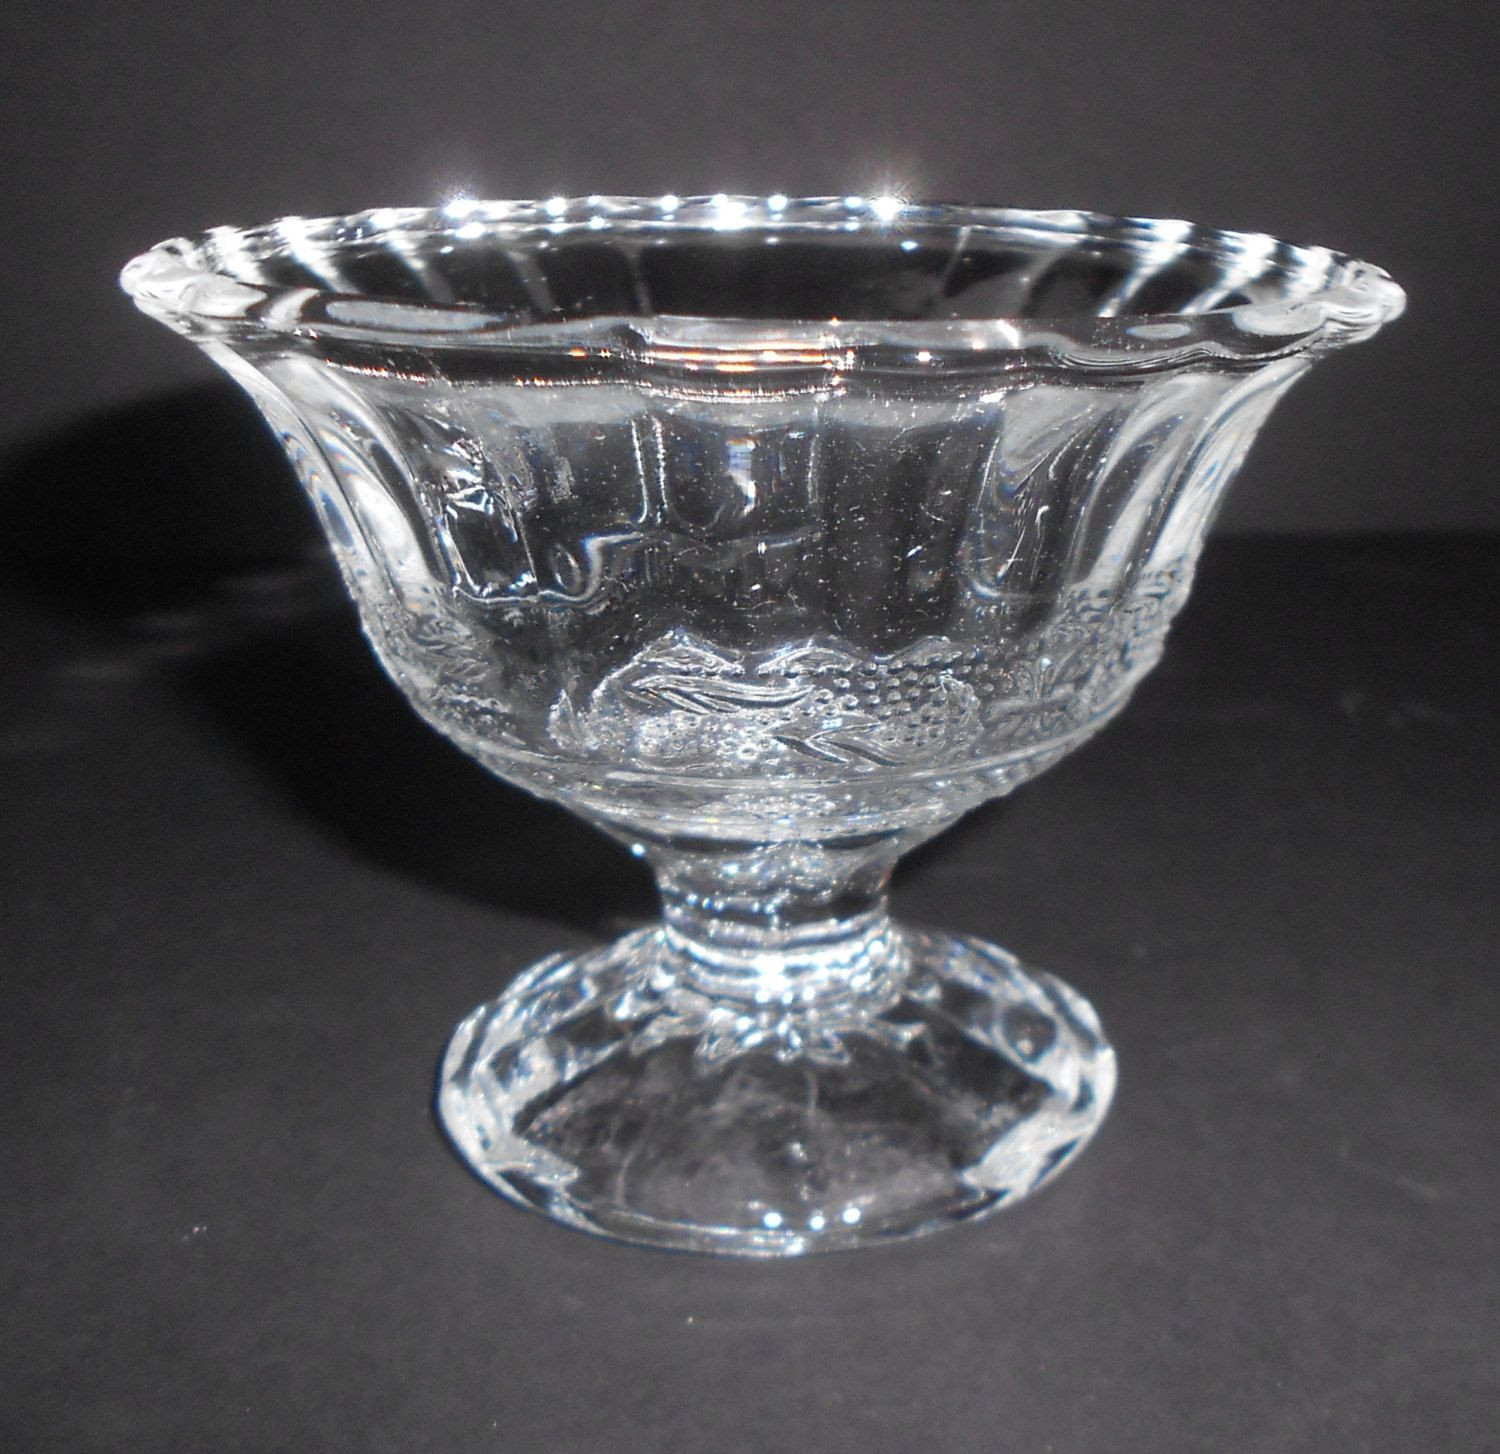 19 Lovable Clear Glass Footed Vase 2024 free download clear glass footed vase of glass pedestal bowls photograph sherbet cup dessert cup dessert bowl pertaining to glass pedestal bowls photograph sherbet cup dessert cup dessert bowl pedestal ba